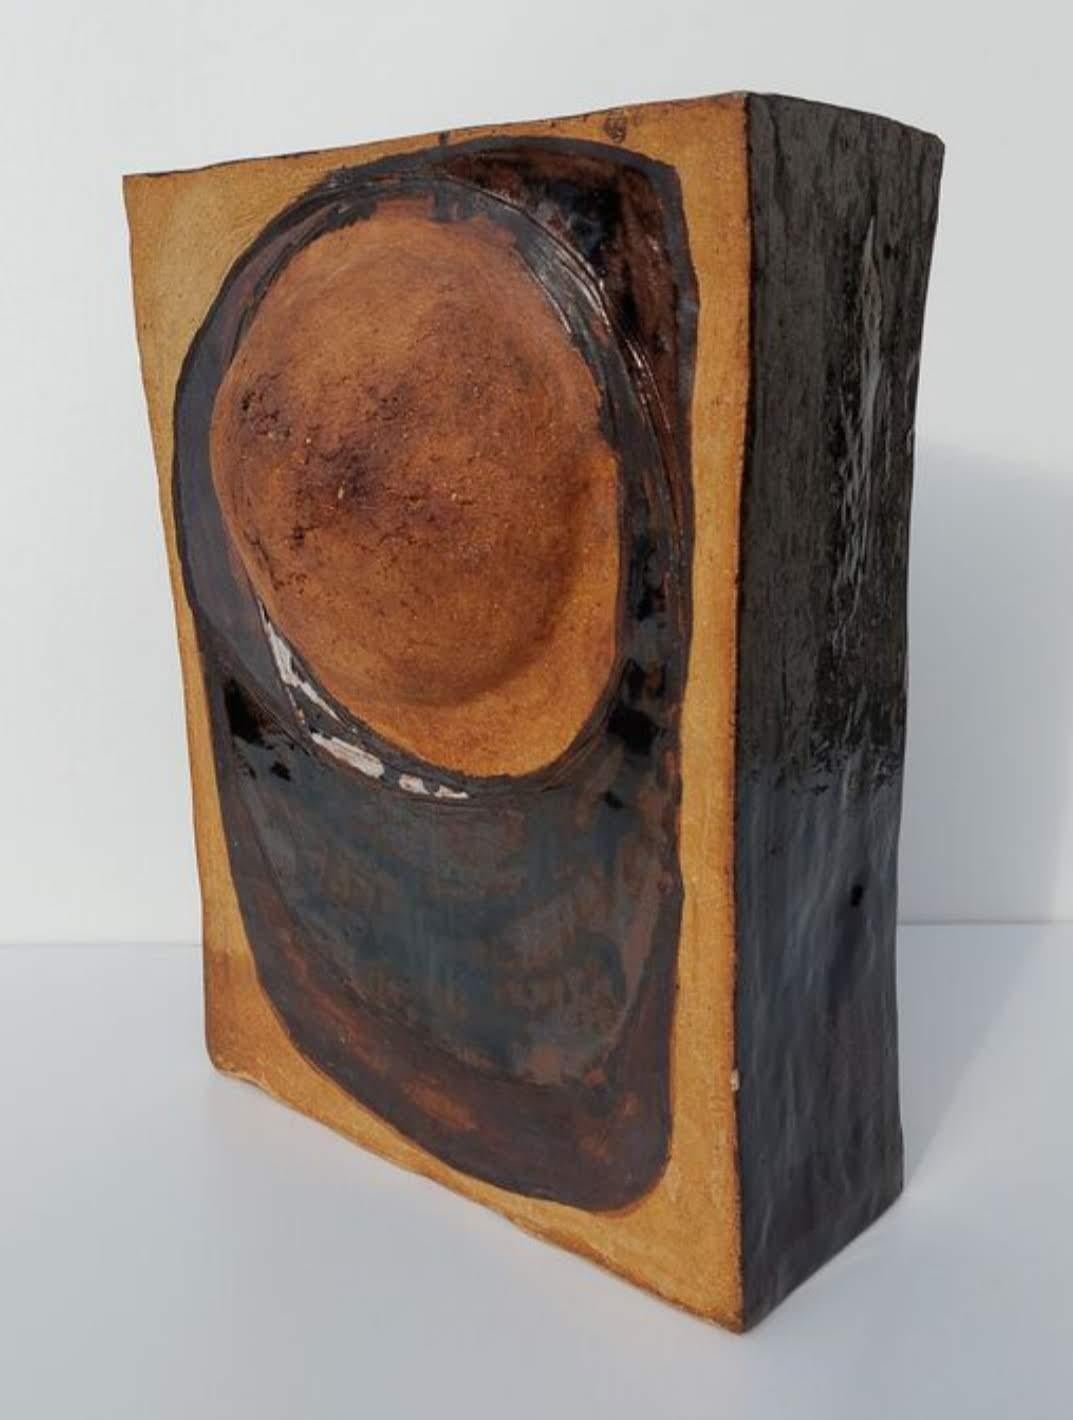 Large sculptural ceramic and terracotta vase made by Karen Boel - Denmark.

Brutalist spirit.

Dimensions:
Height 37cm
Width 27cm
Depth 10cm
Wall thickness 0.9 cm

7kgs.

Very small scratches.

Marries Willy Rizzo Guariche Artemide